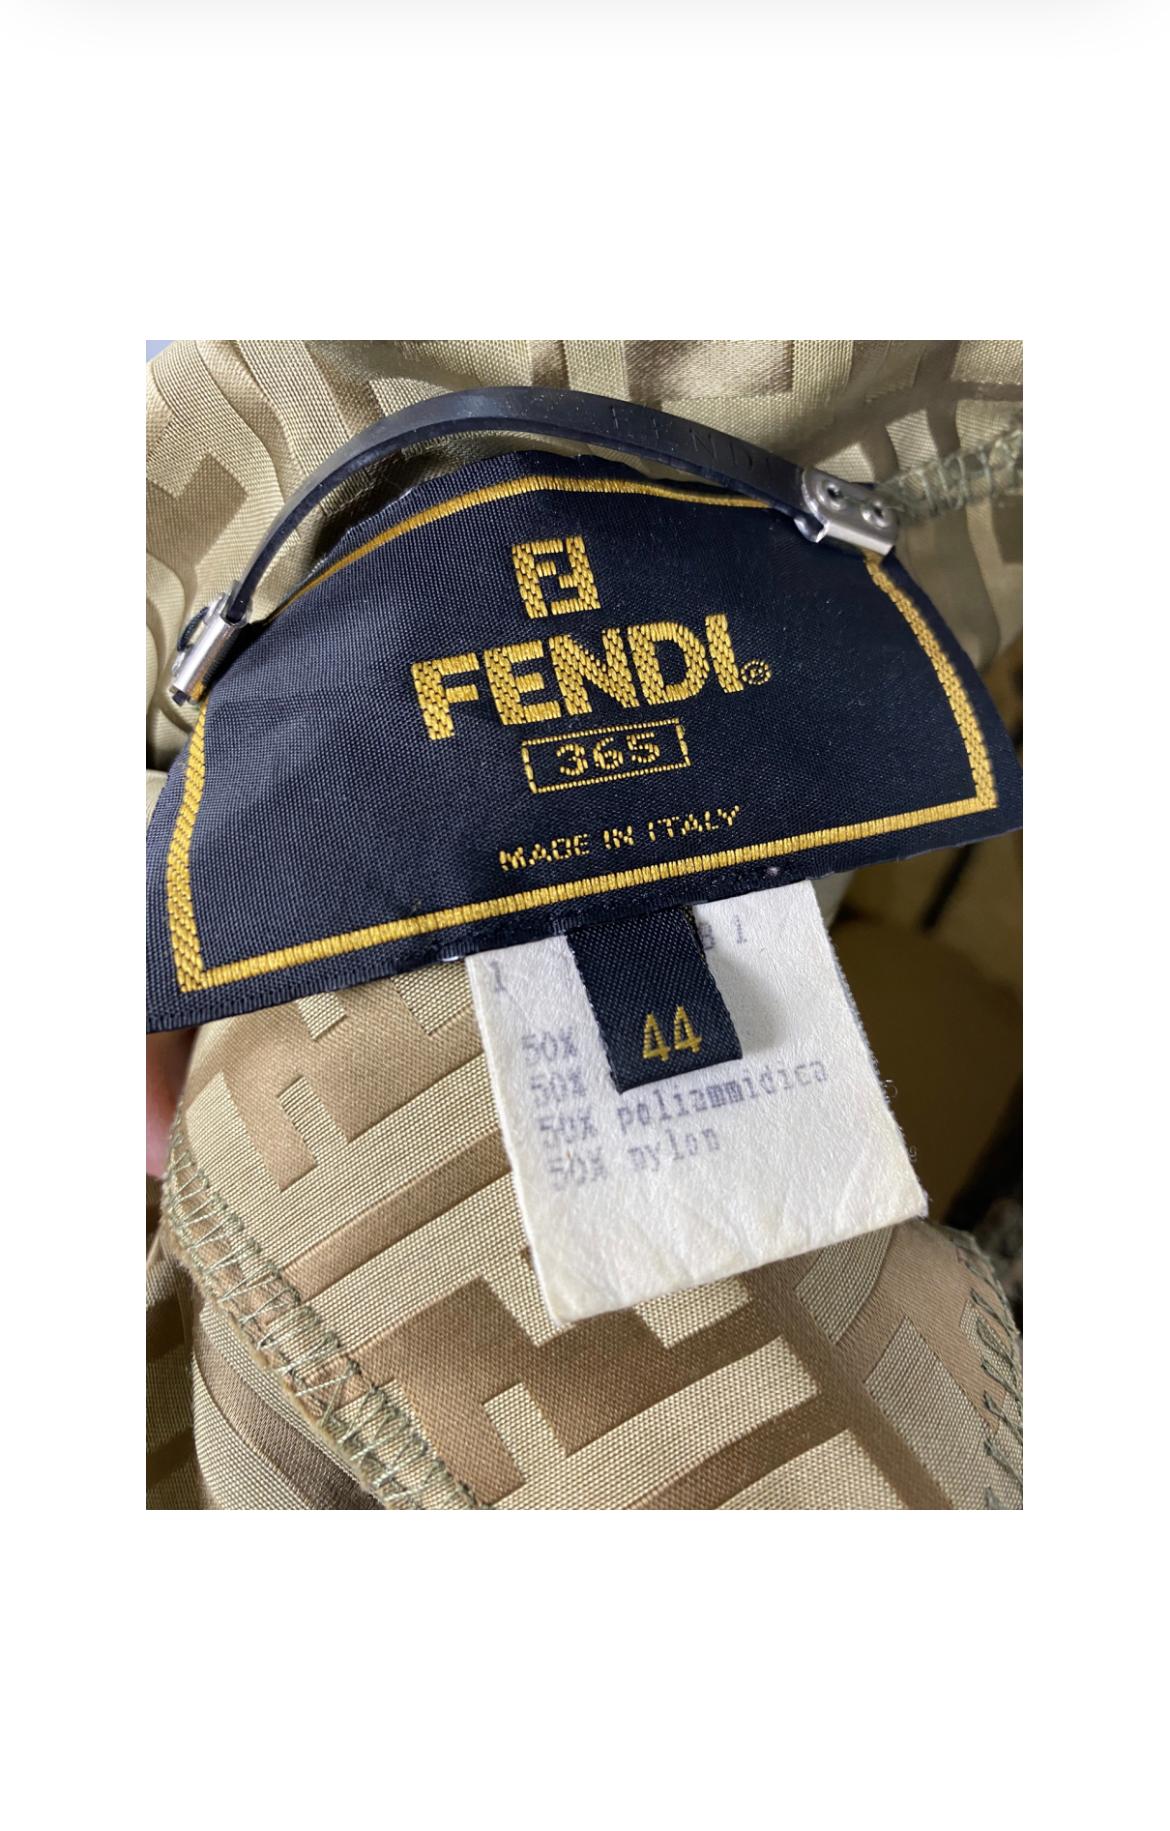 Fendi windcoat totally logoed gold color, with removable hood, there are 2 pockets on the front, all buttons are logoed in silver, size 44Italian, measures: shoulder 48cm length 80cm sleeve 62cm chest 54cm more than good condition